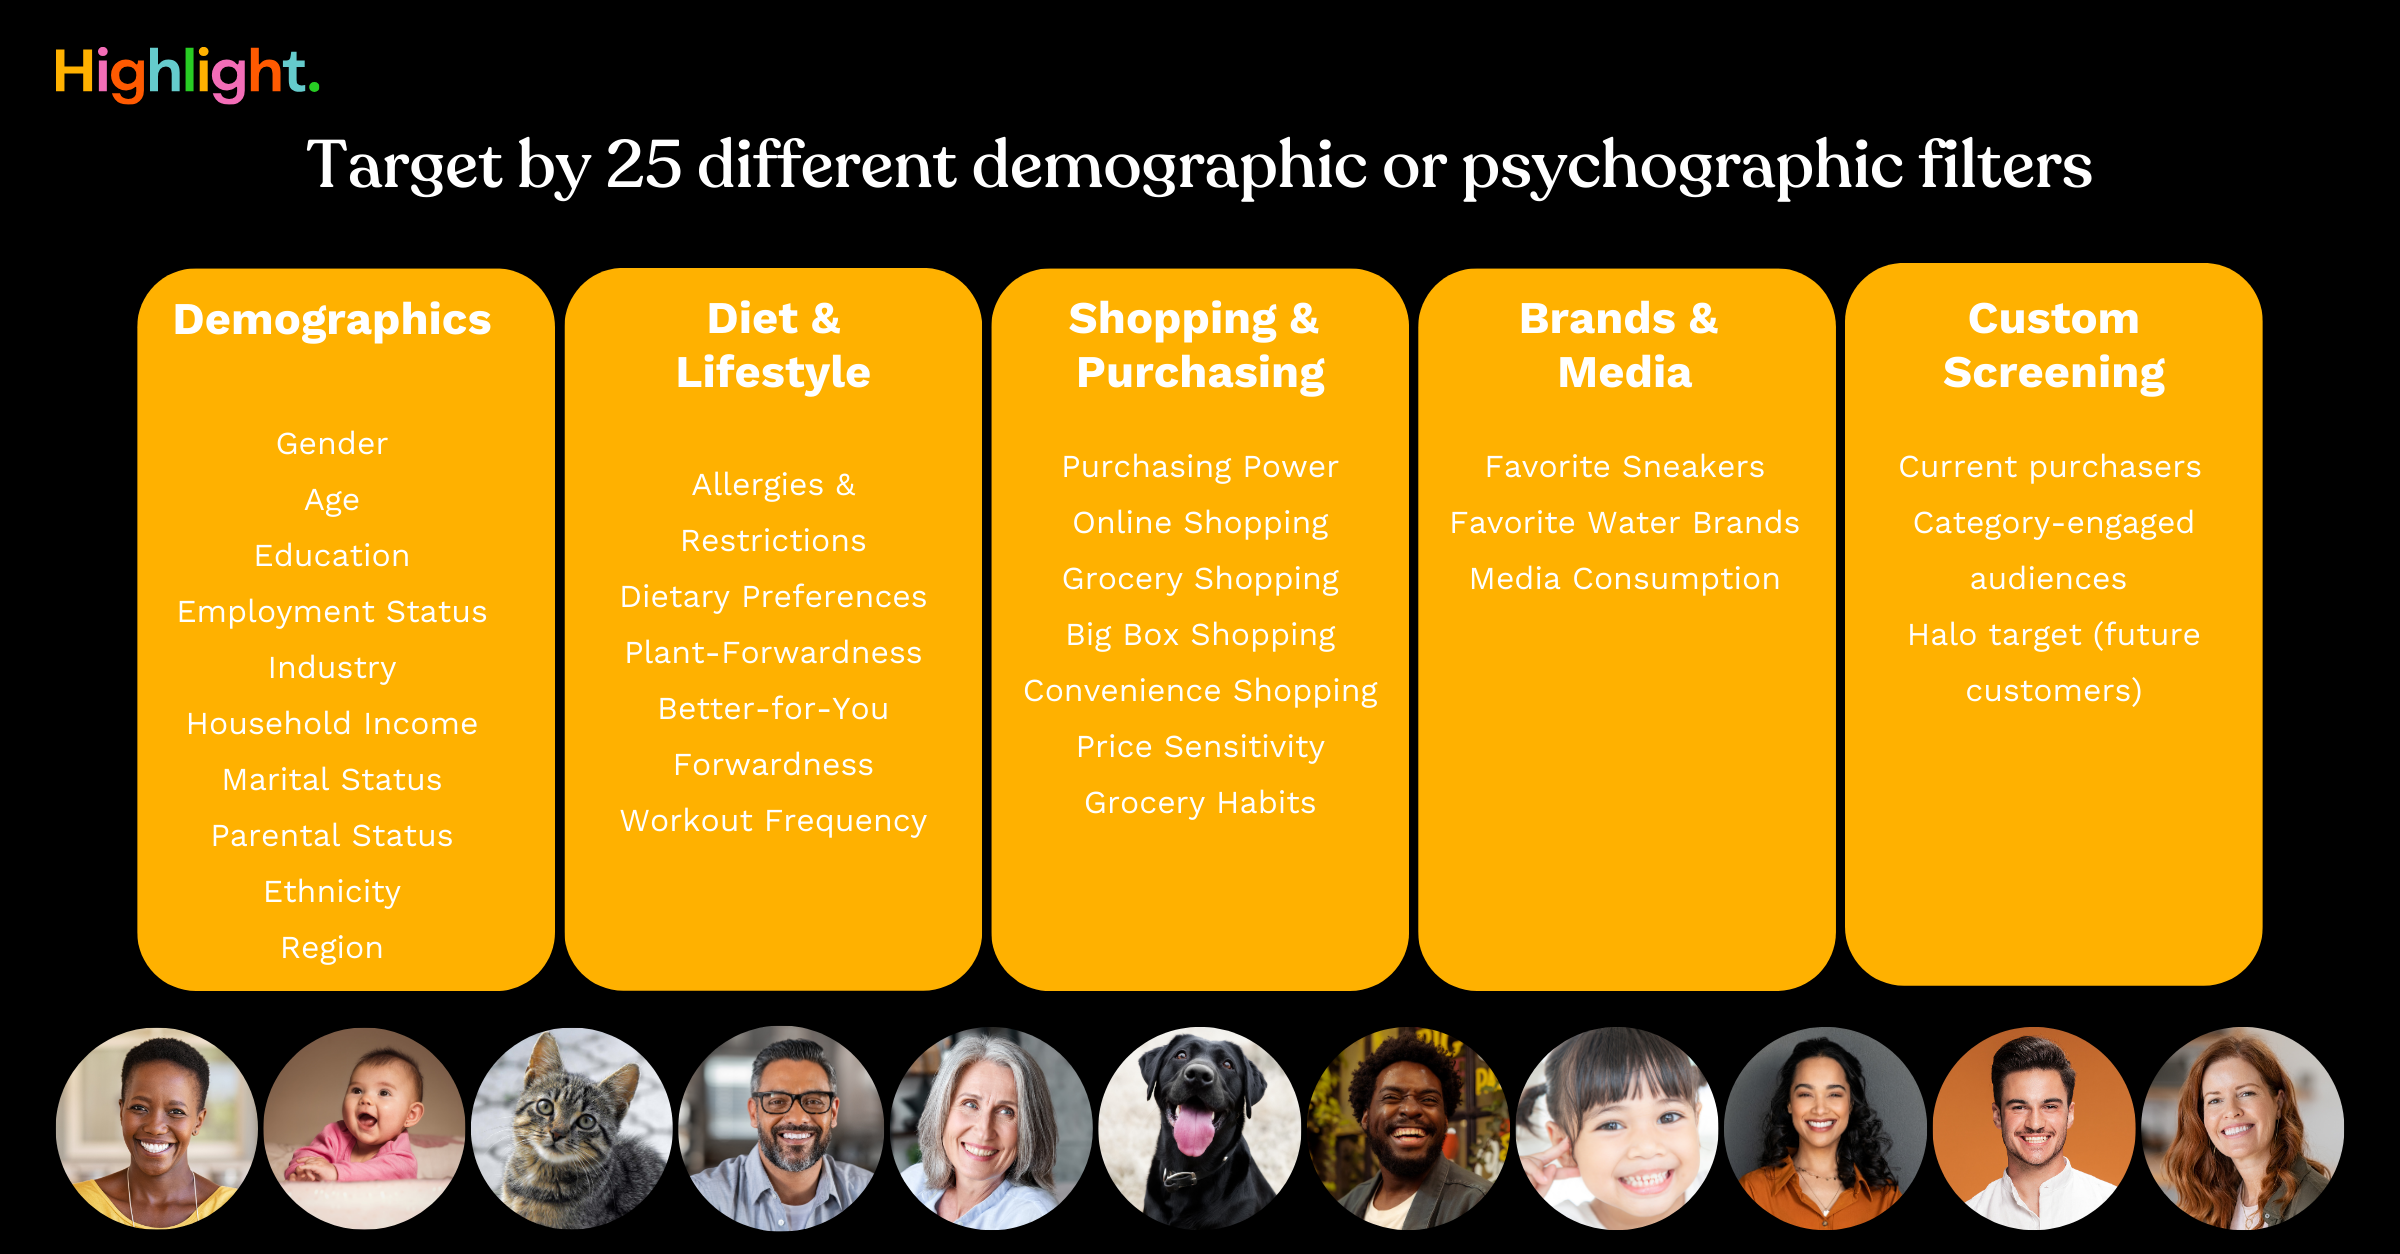 Demographic + Psychographic filters